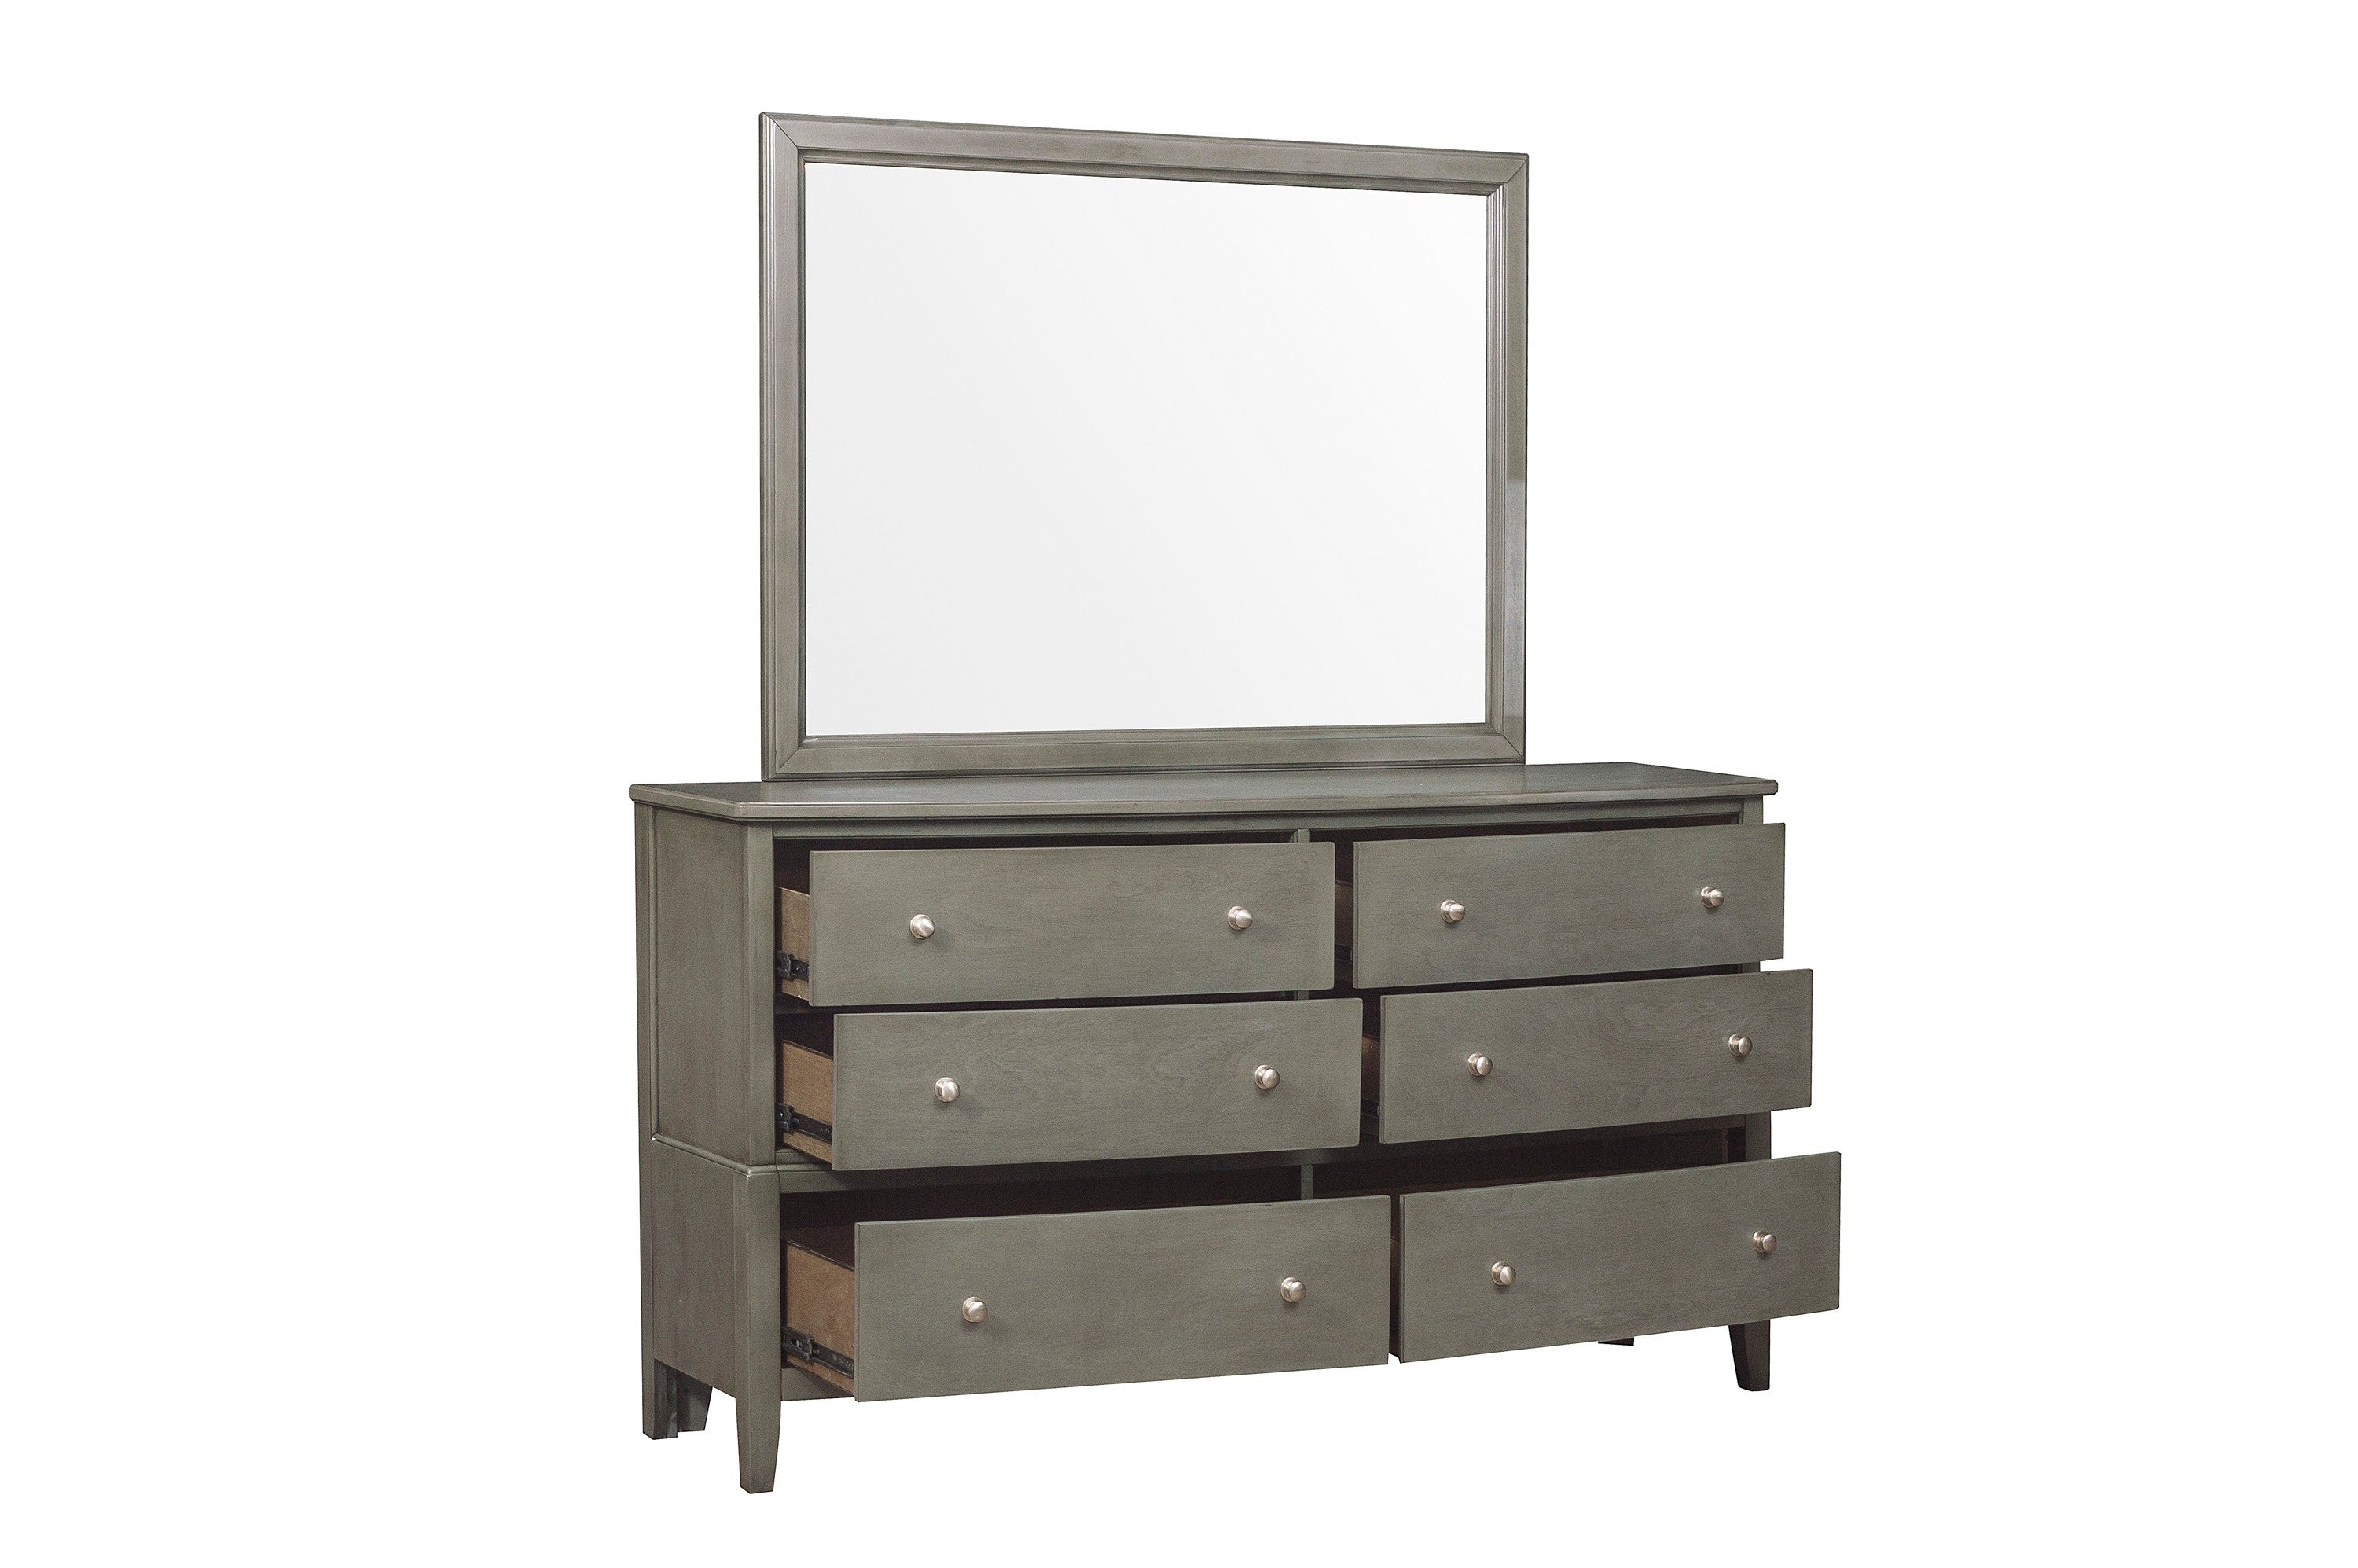 Cotterill Gray Upholstered Panel Youth Bedroom Set - SET | 1730FGY-1 | 1730FGY-2 | 1730FGY-3 | 1730GY-5 | 1730GY-6 | 1730GY-4 - Bien Home Furniture &amp; Electronics